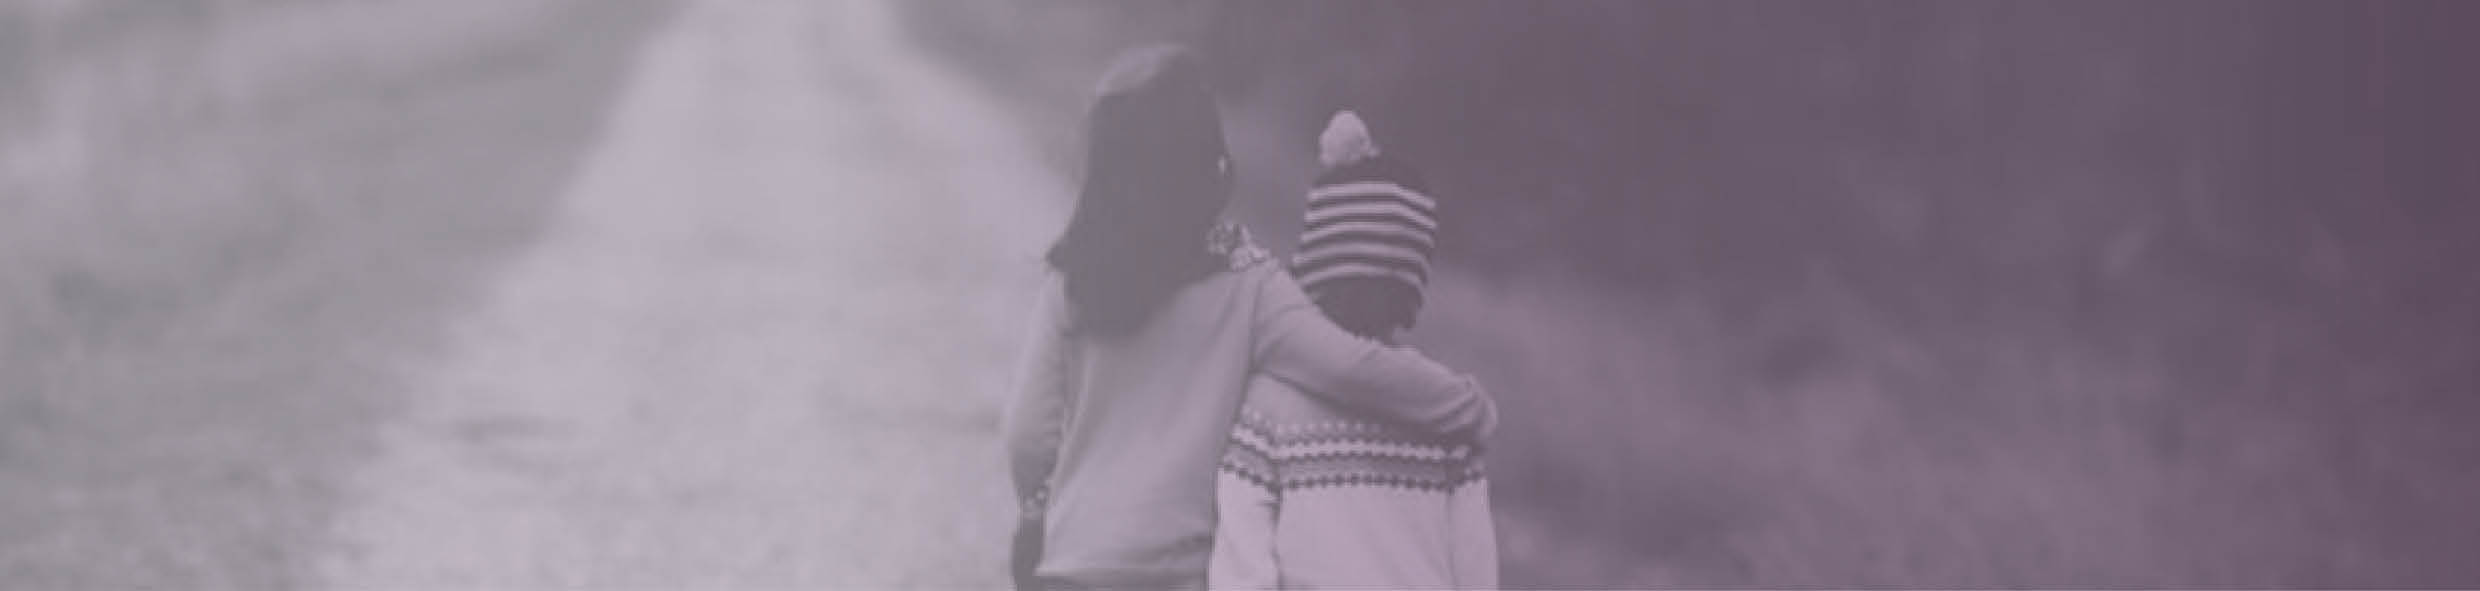 Need help image banner showing a black and white picture of two people walking, with one person with their arm around the other